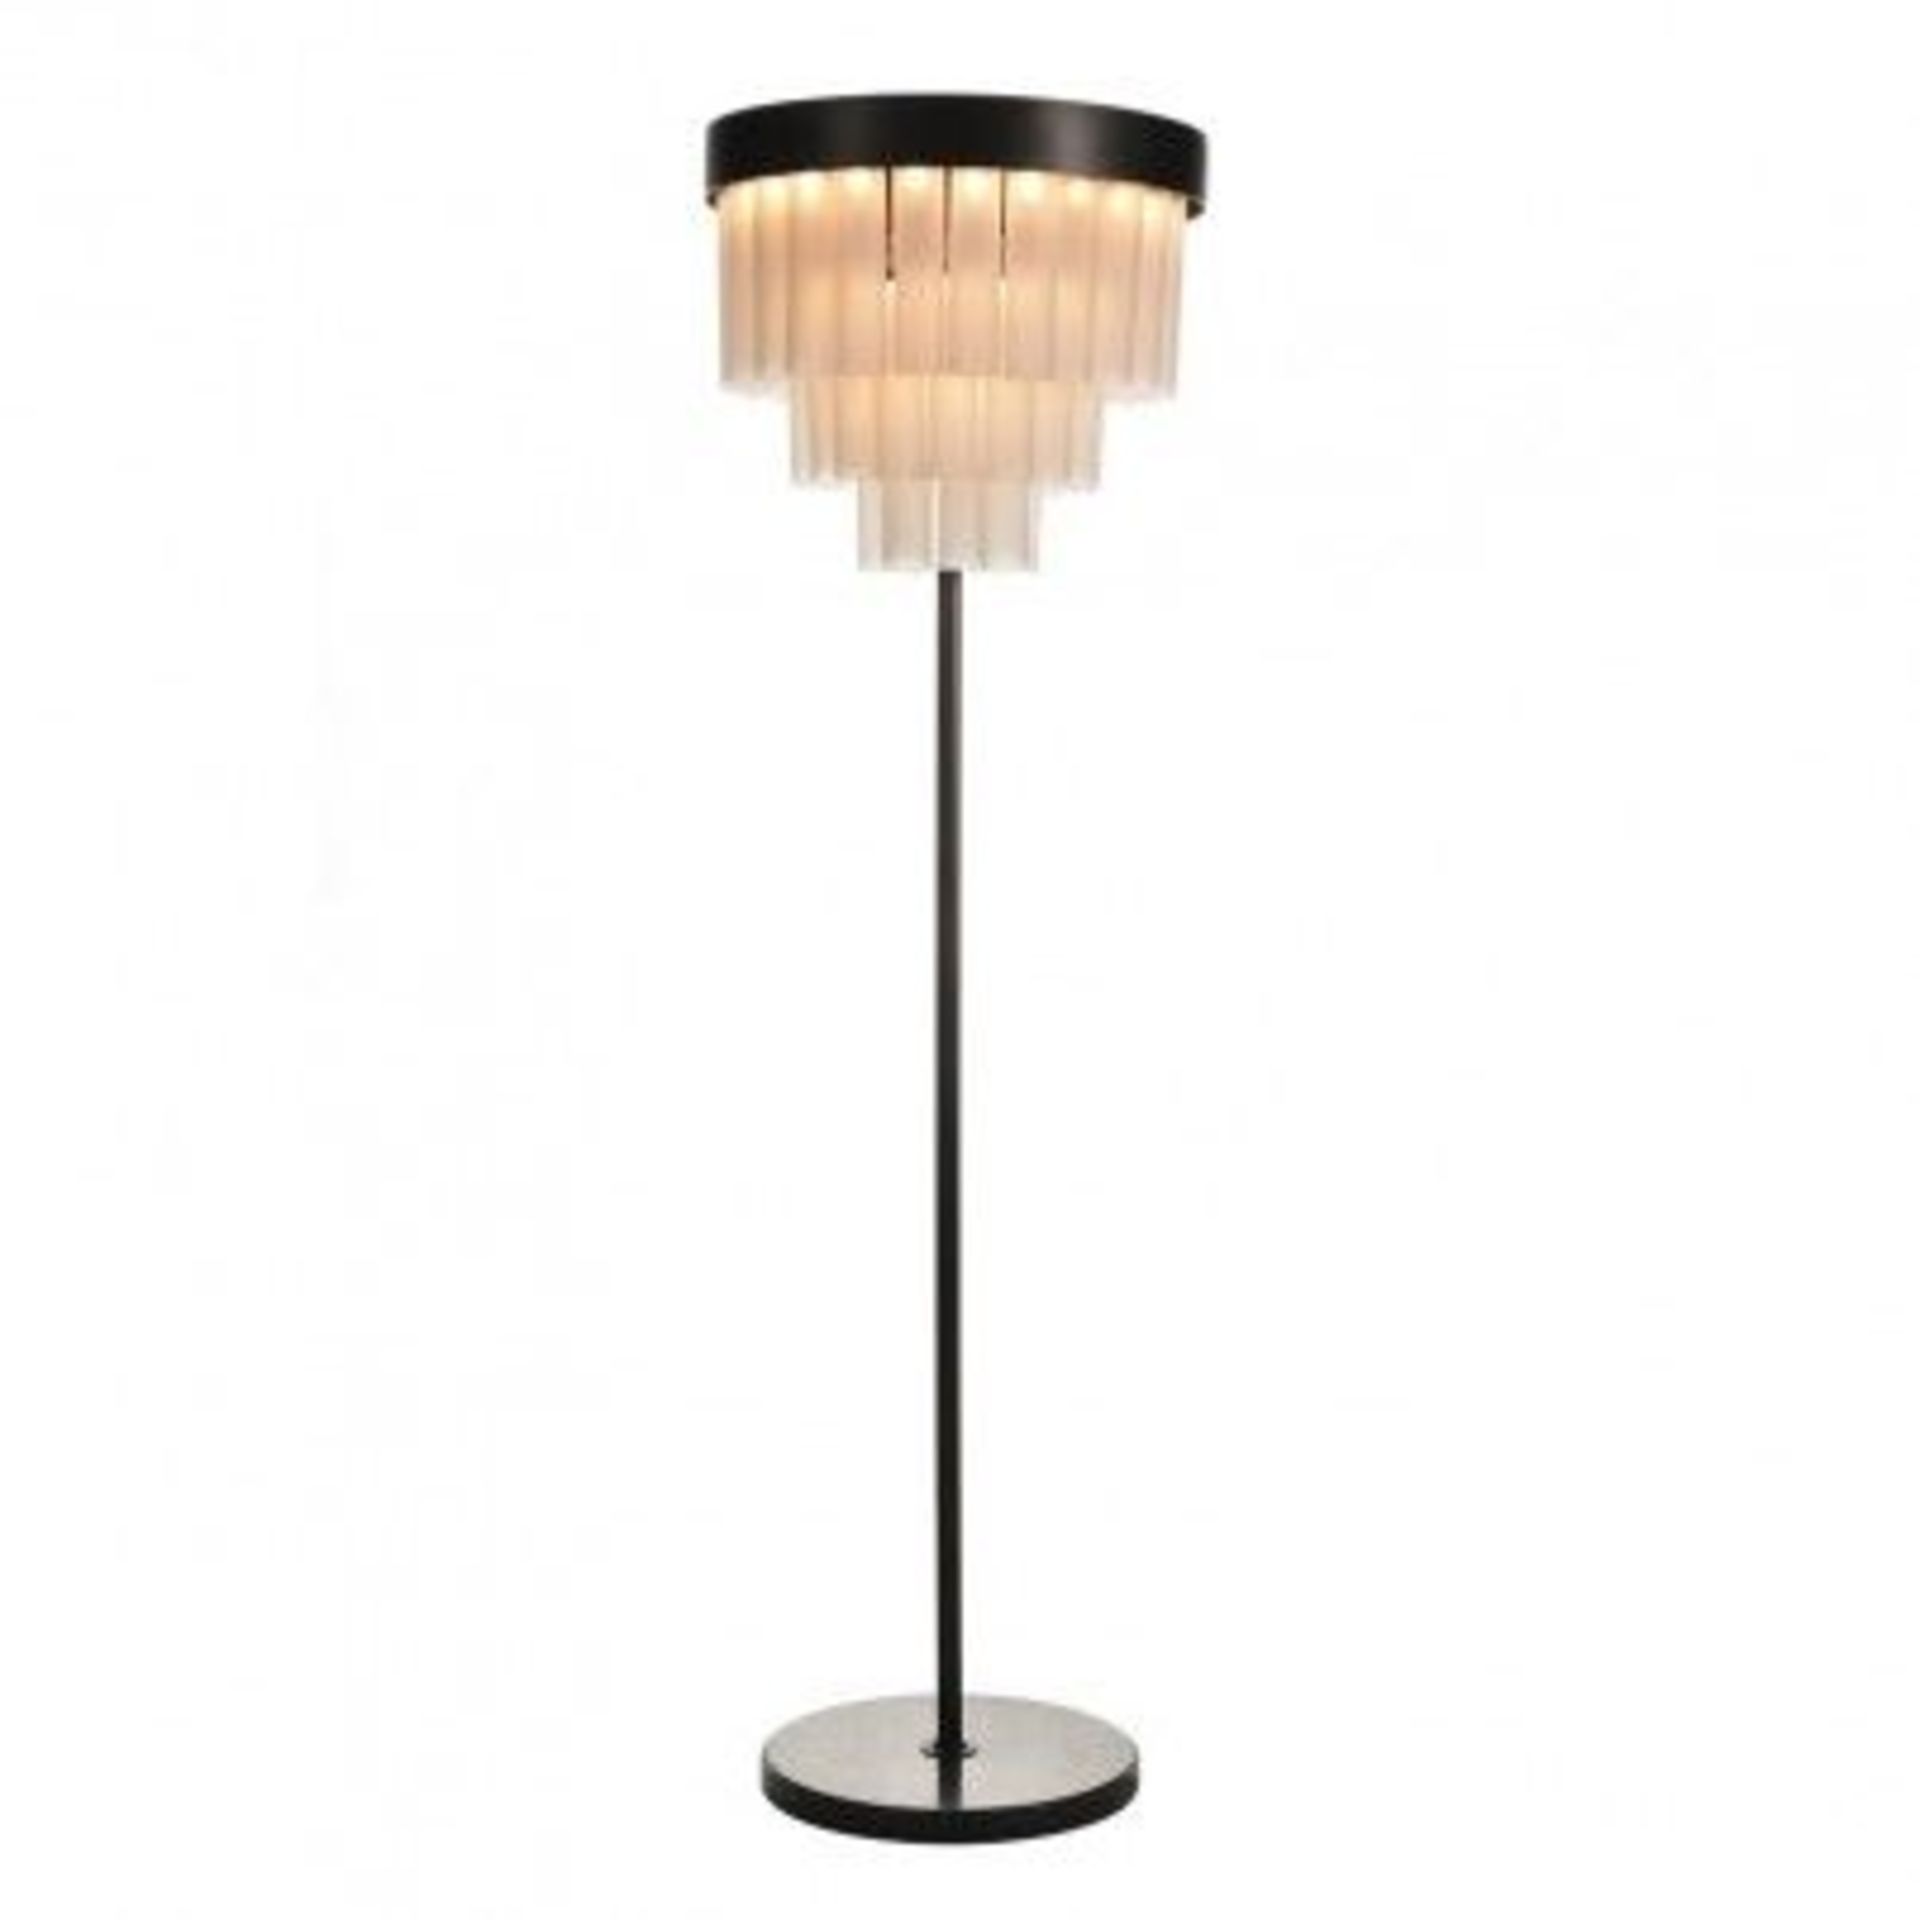 Empire Floor Lamp-Matt Black The Empire Lighting Collection is inspired by the beautiful light - Image 2 of 2